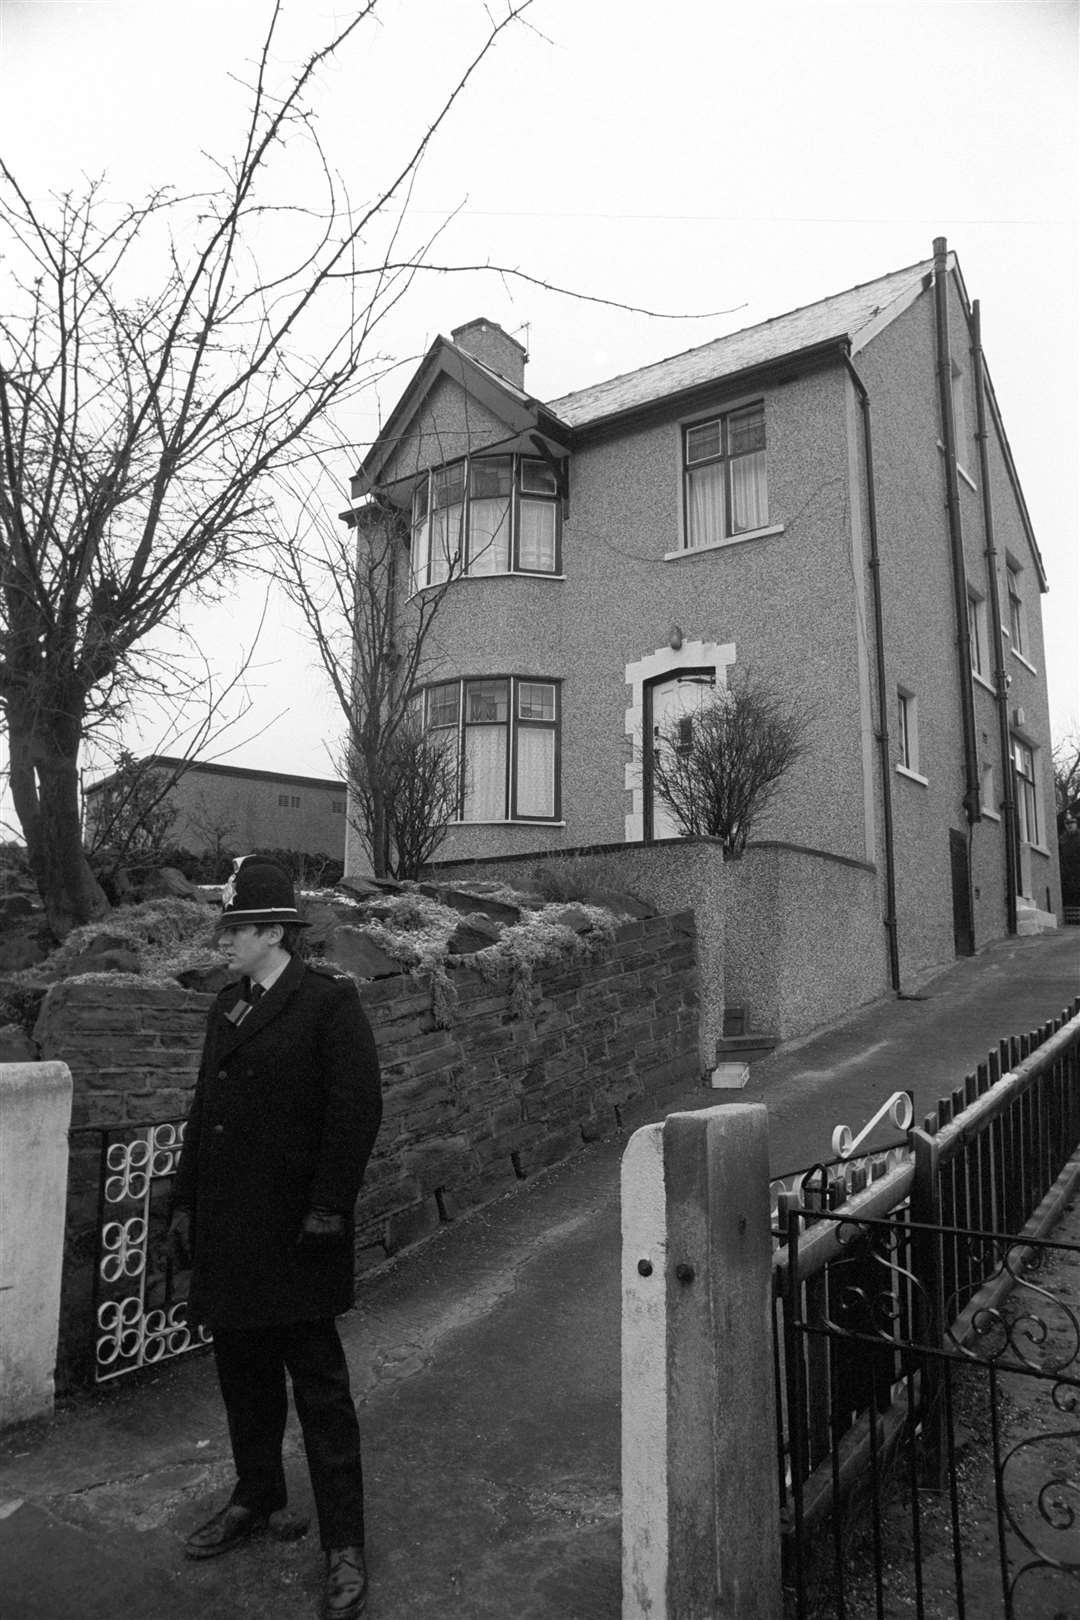 The detached house in Bradford which was home to Peter Sutcliffe (PA)